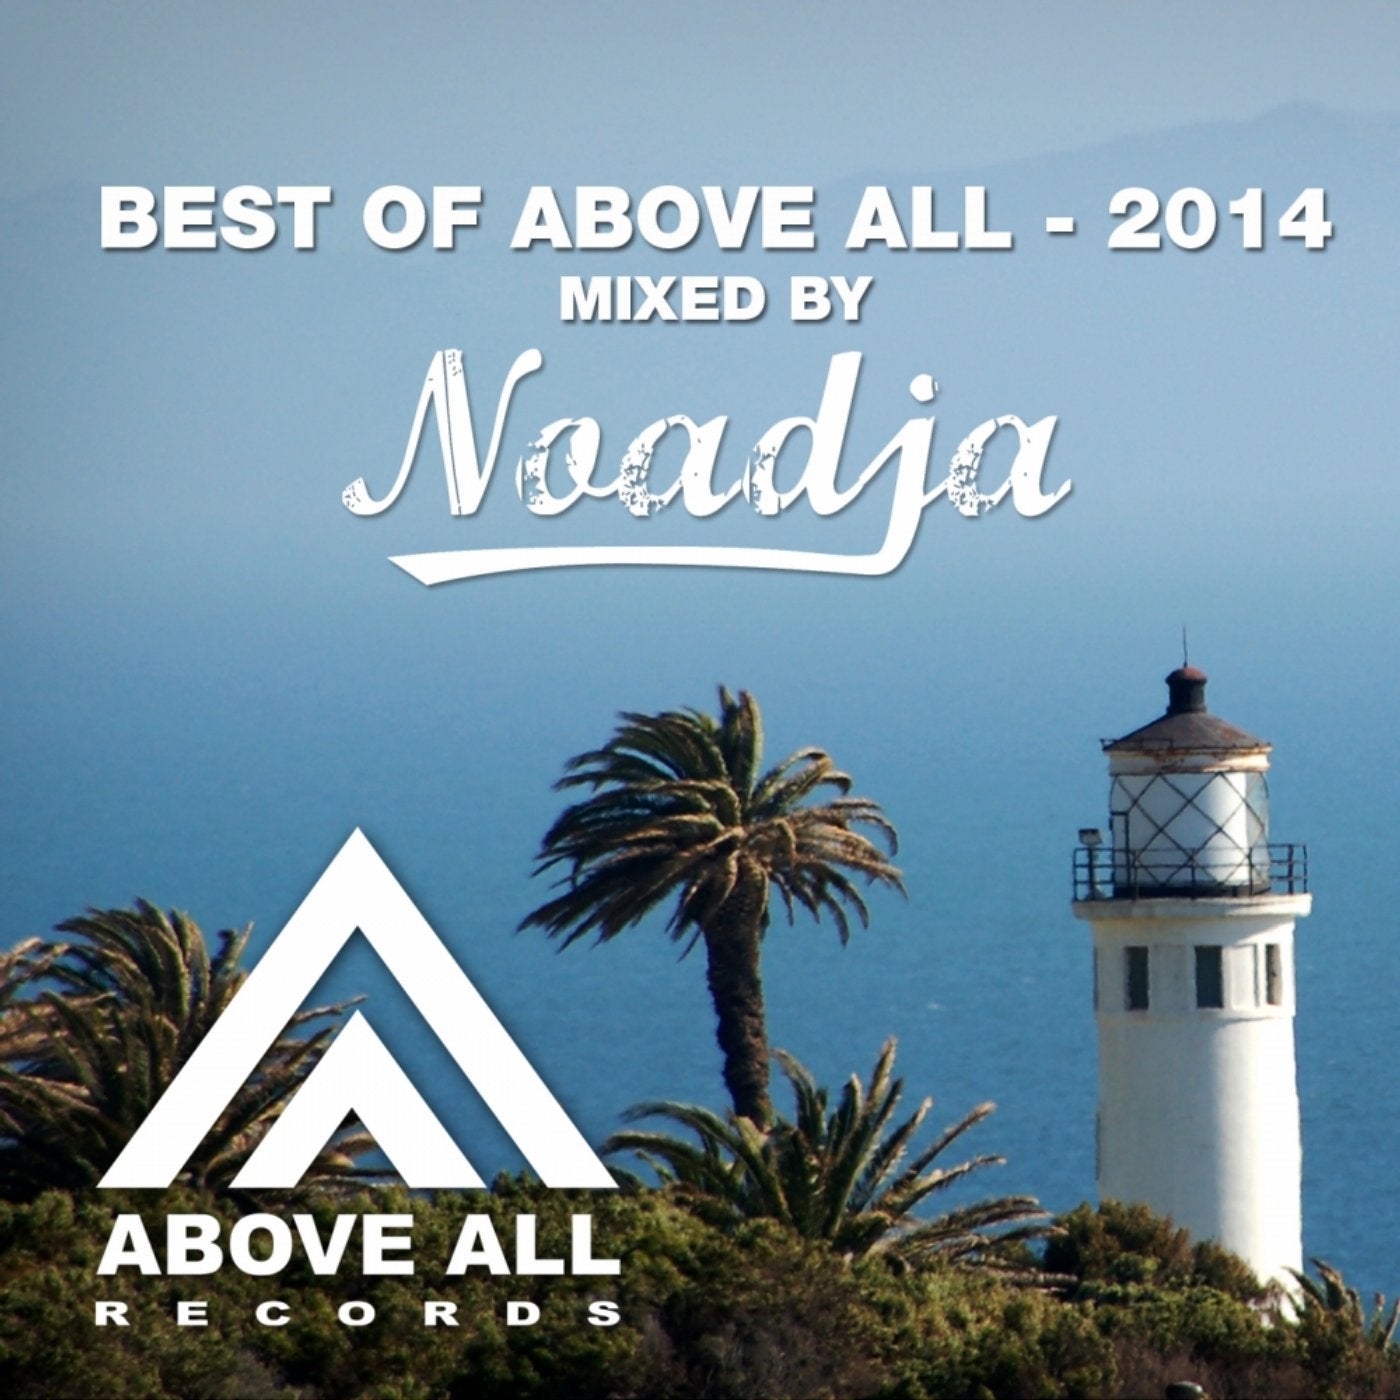 Best of Above All - 2014